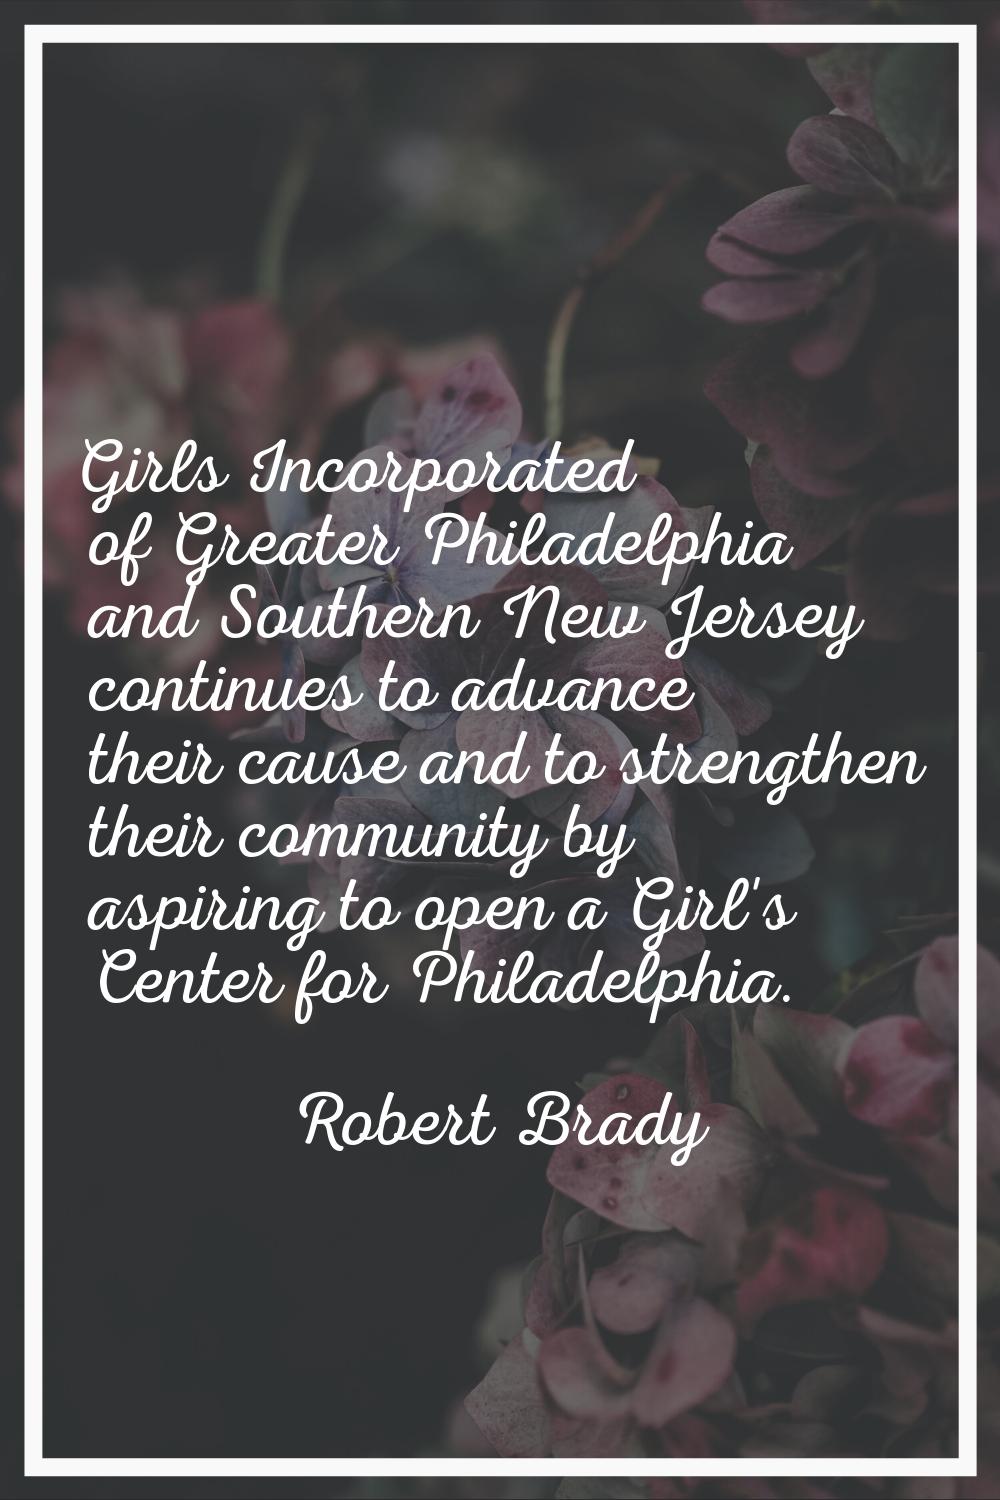 Girls Incorporated of Greater Philadelphia and Southern New Jersey continues to advance their cause